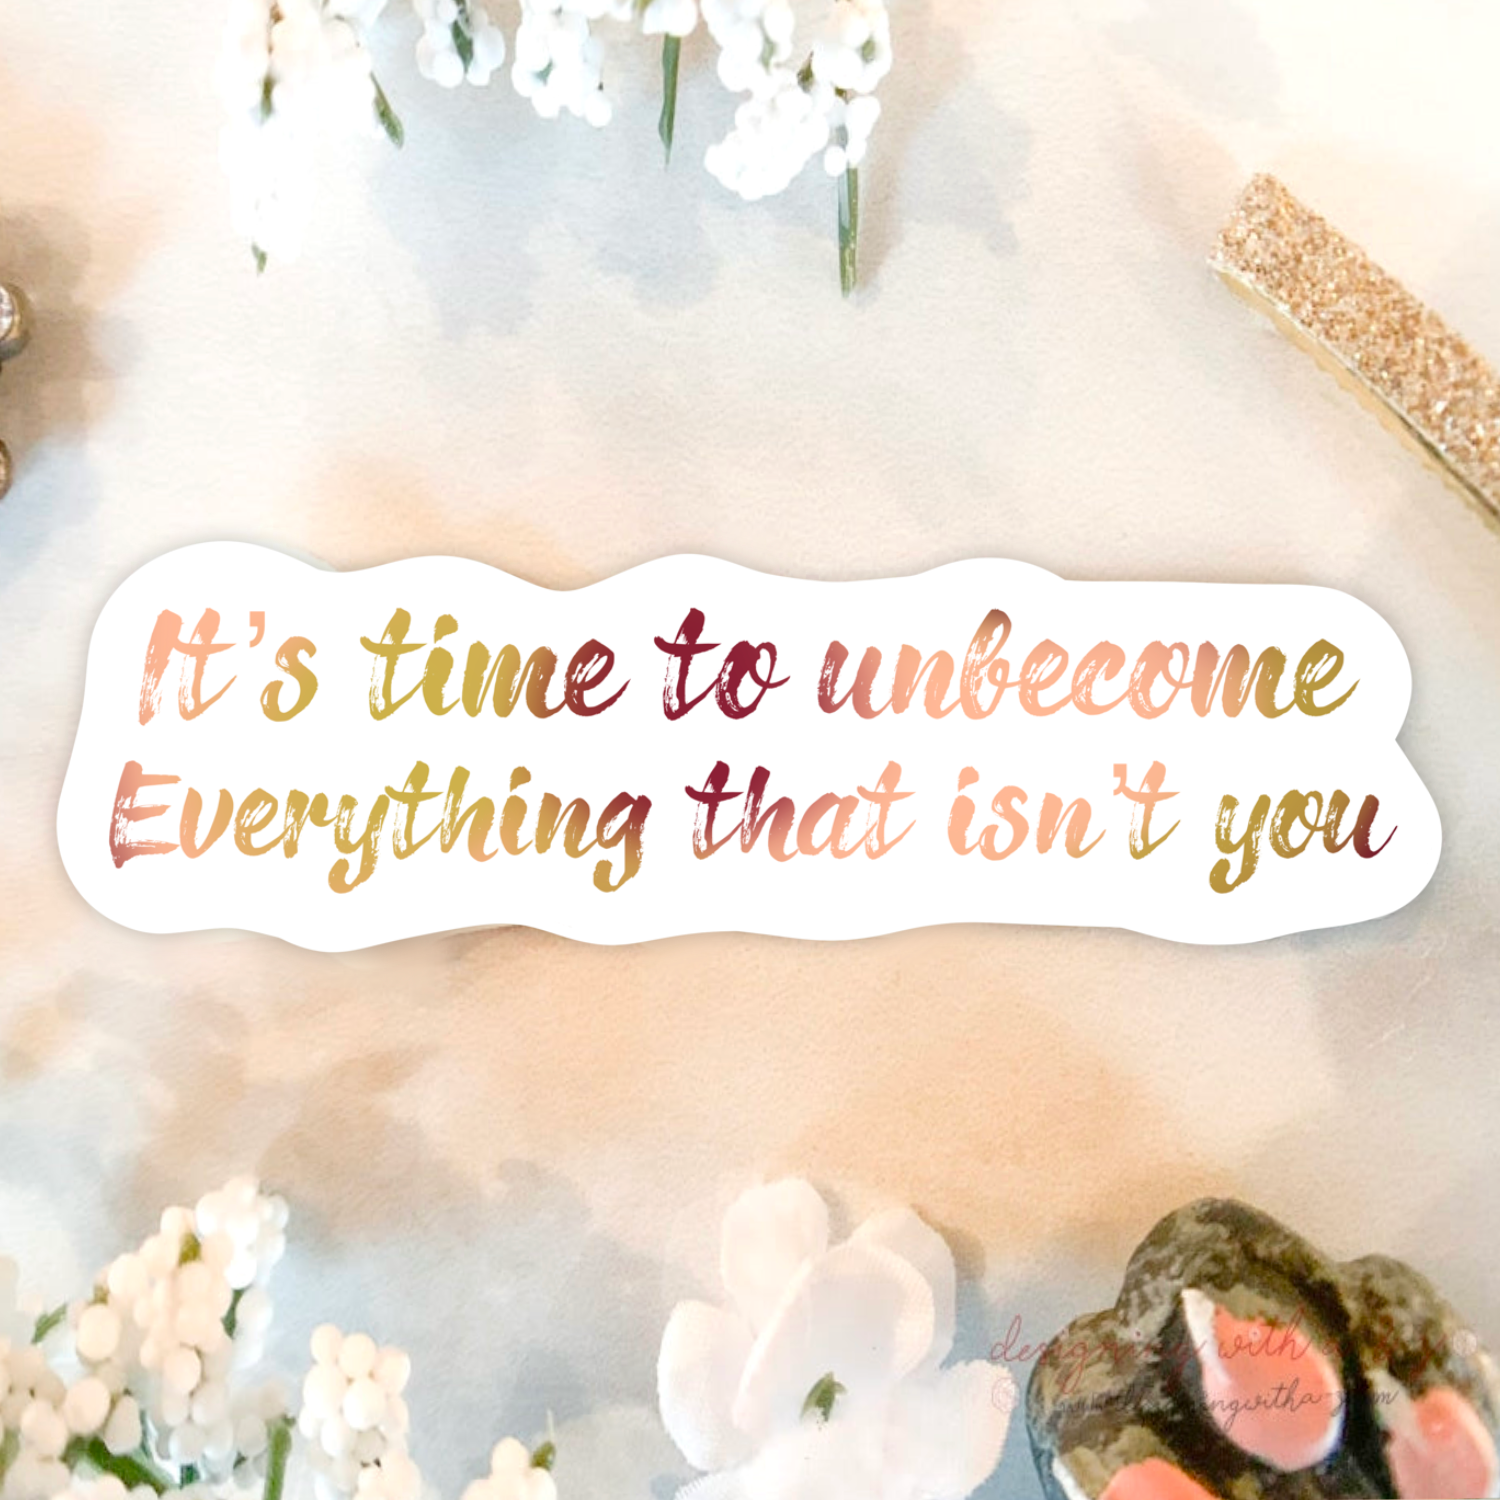 Neverending Stickers - It’s Time To Unbecome Everything That Isn’t You - Inspirational Quote - 1.5x3.5in - Vinyl Sticker